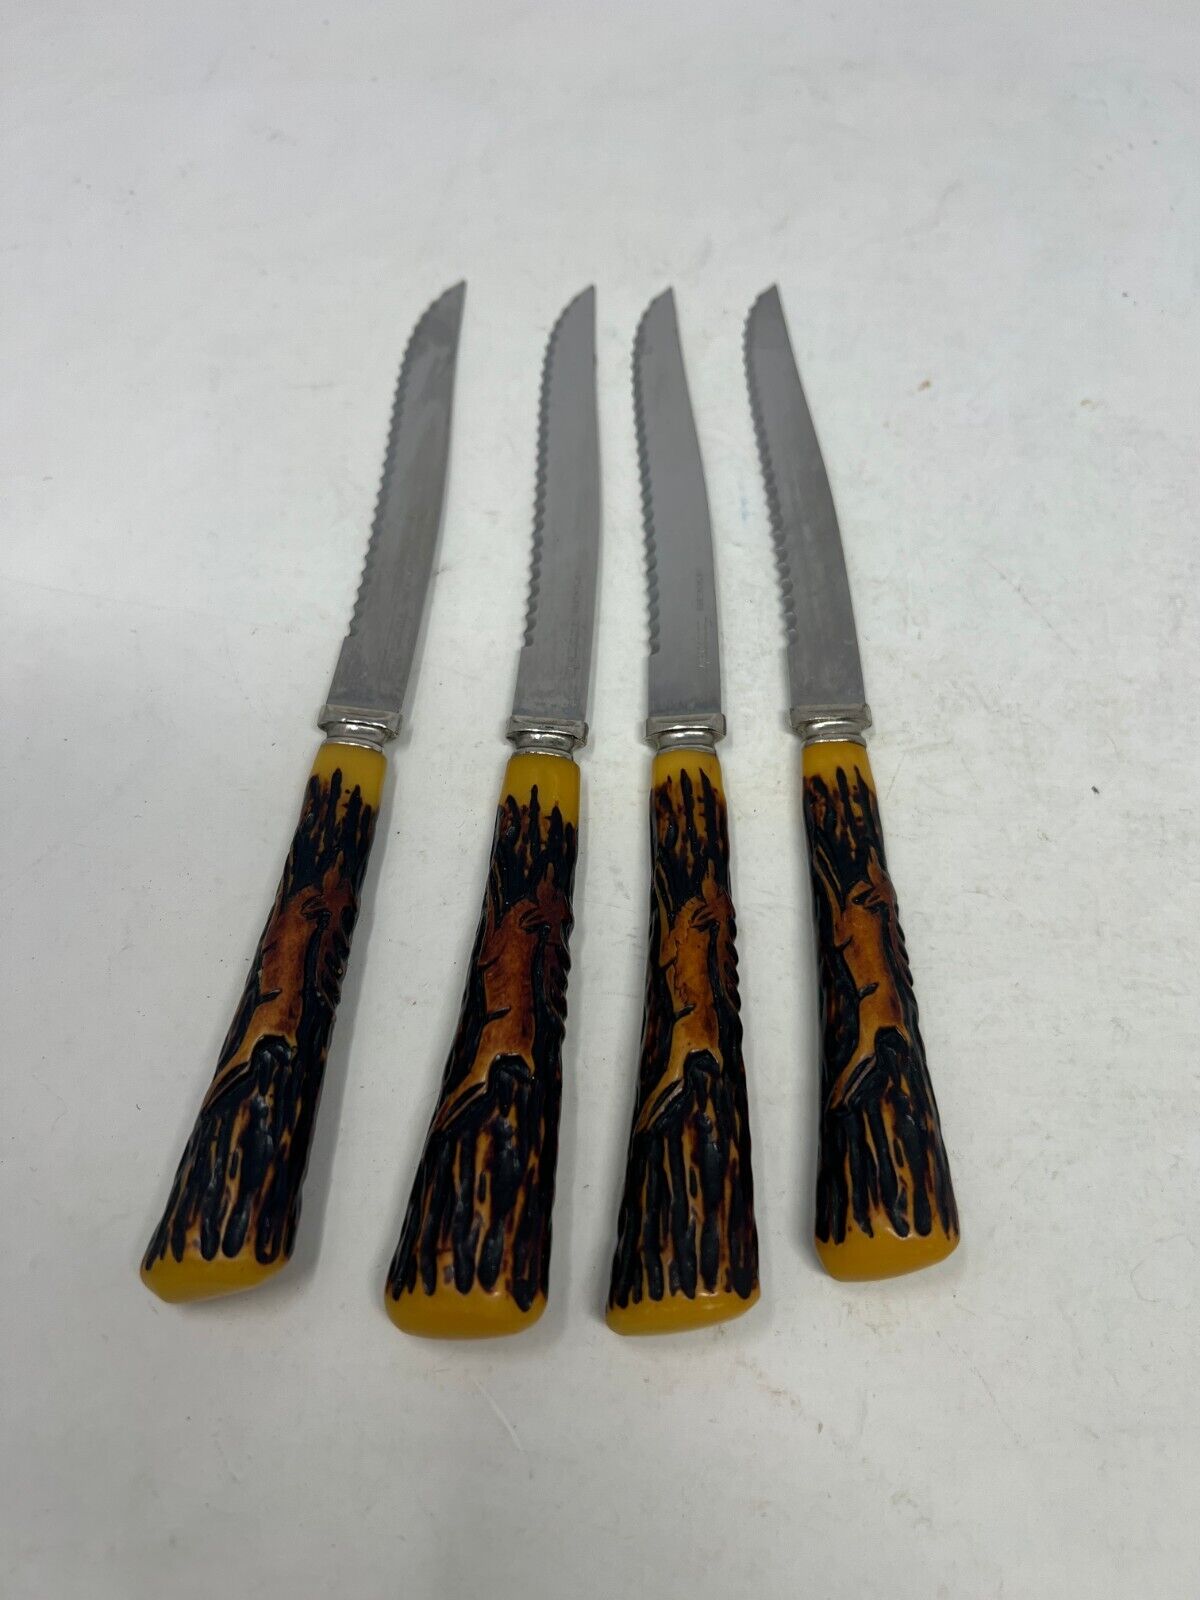 FORGECRAFT USA Set 4 Serrated Stainless Steel Steak Knives